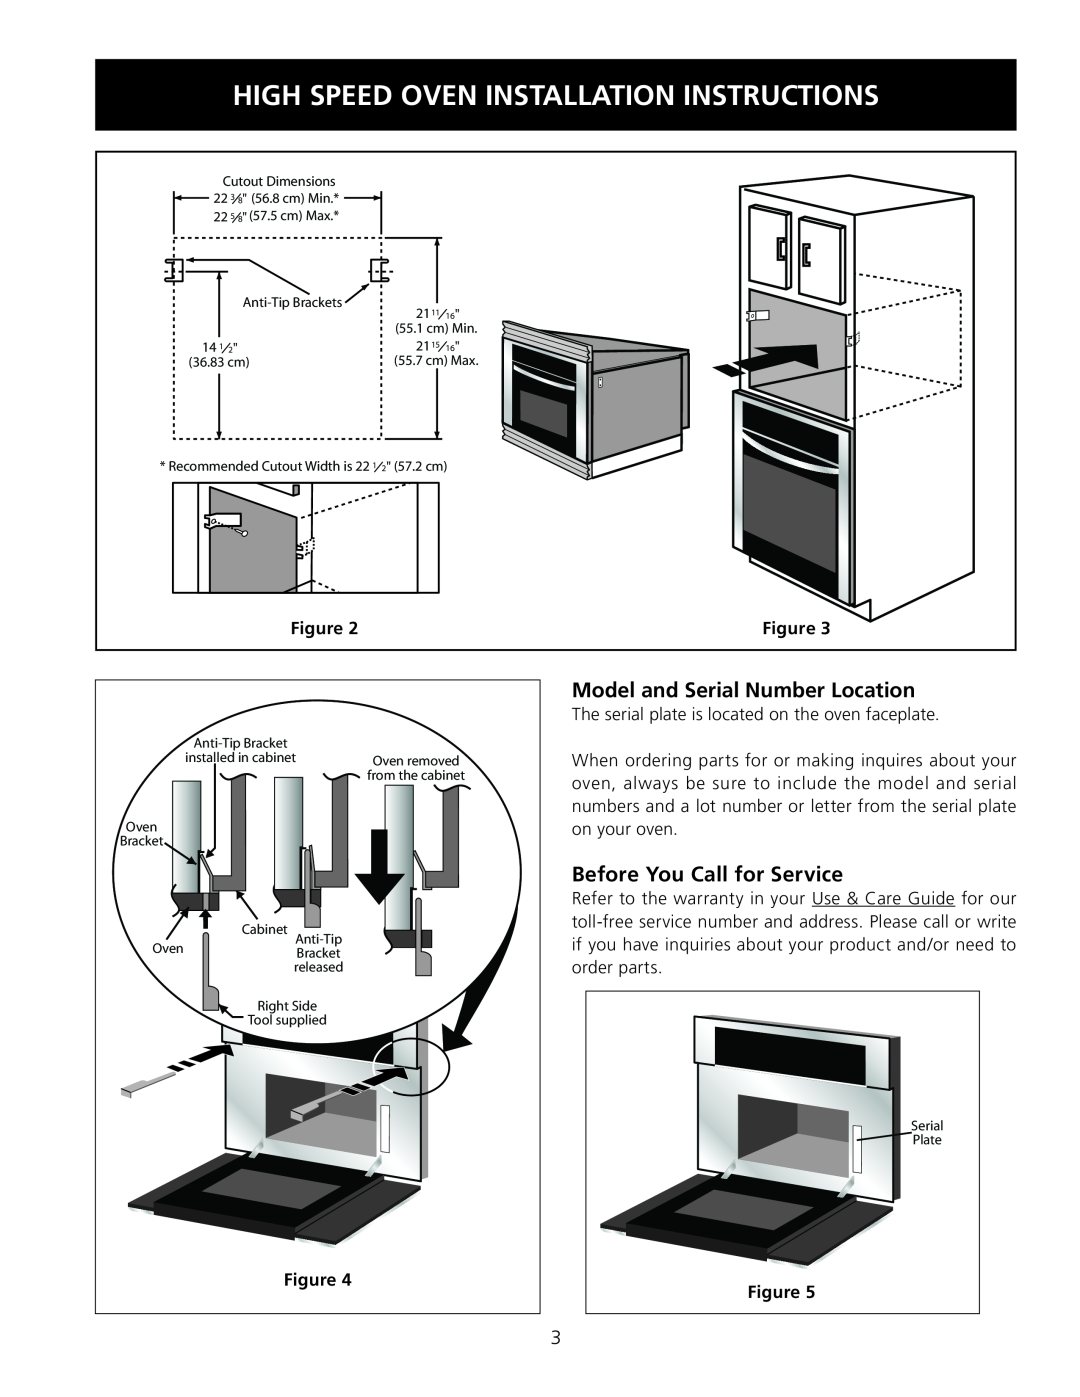 Electrolux TINSEB424MRR0 High Speed Oven Installation Instructions, Model and Serial Number Location 